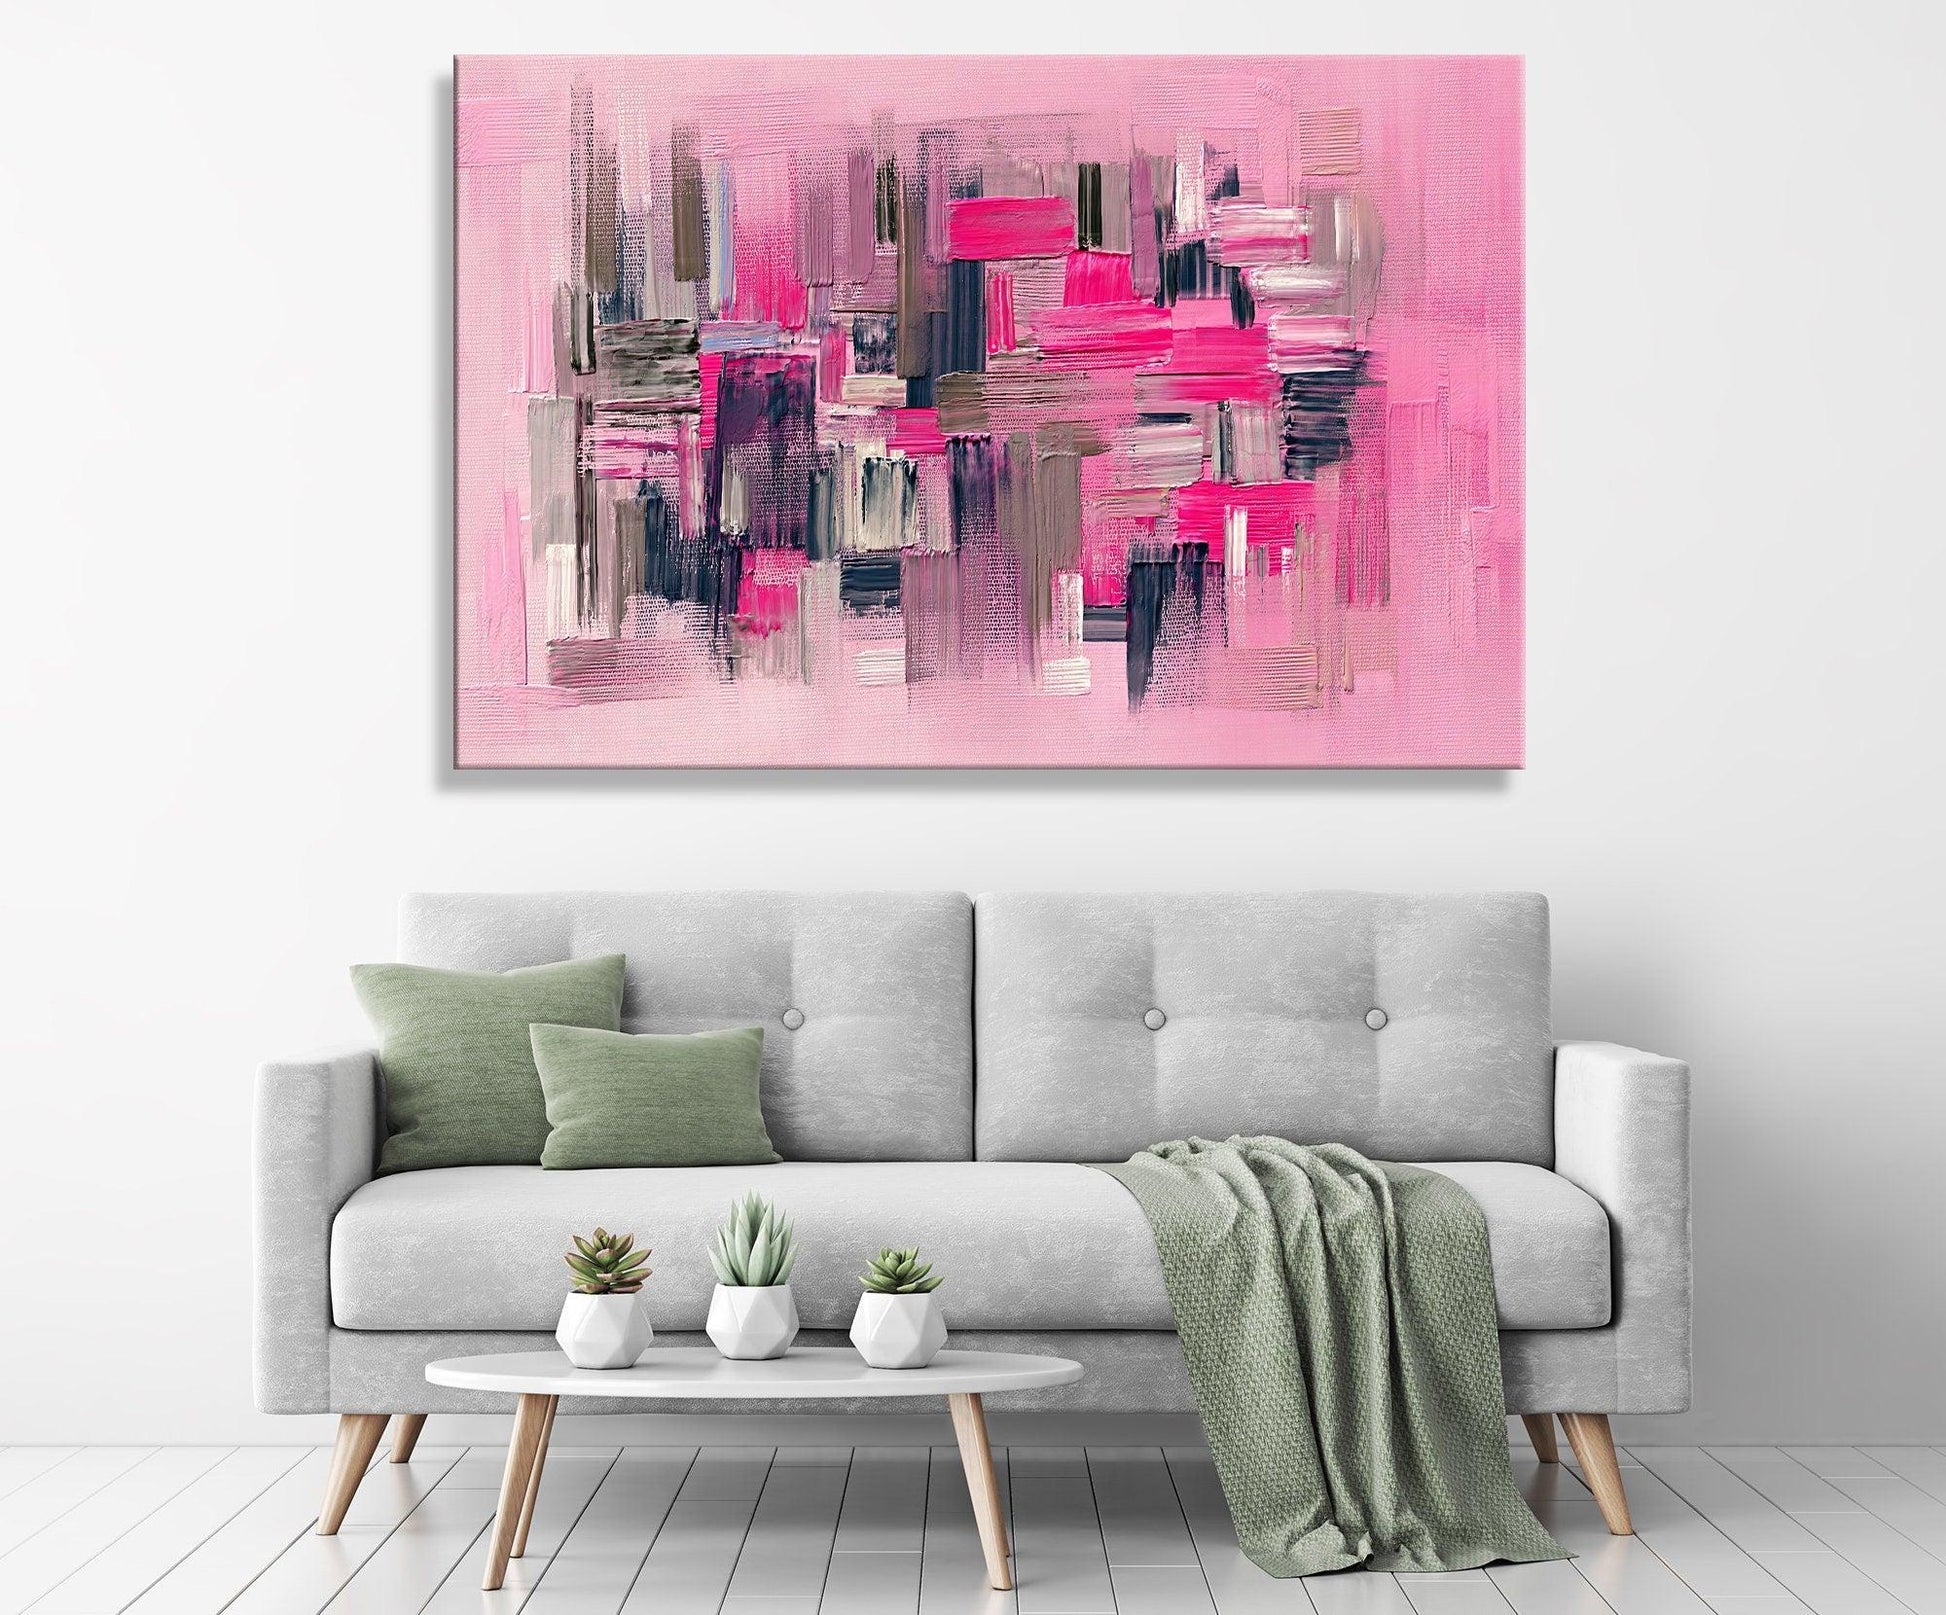 Abstract pink Textured glass wall art |Oil Painting on Canvas, pink Large Original Custom Modern Painting Living Room Wall Art, pink art - TrendiArt